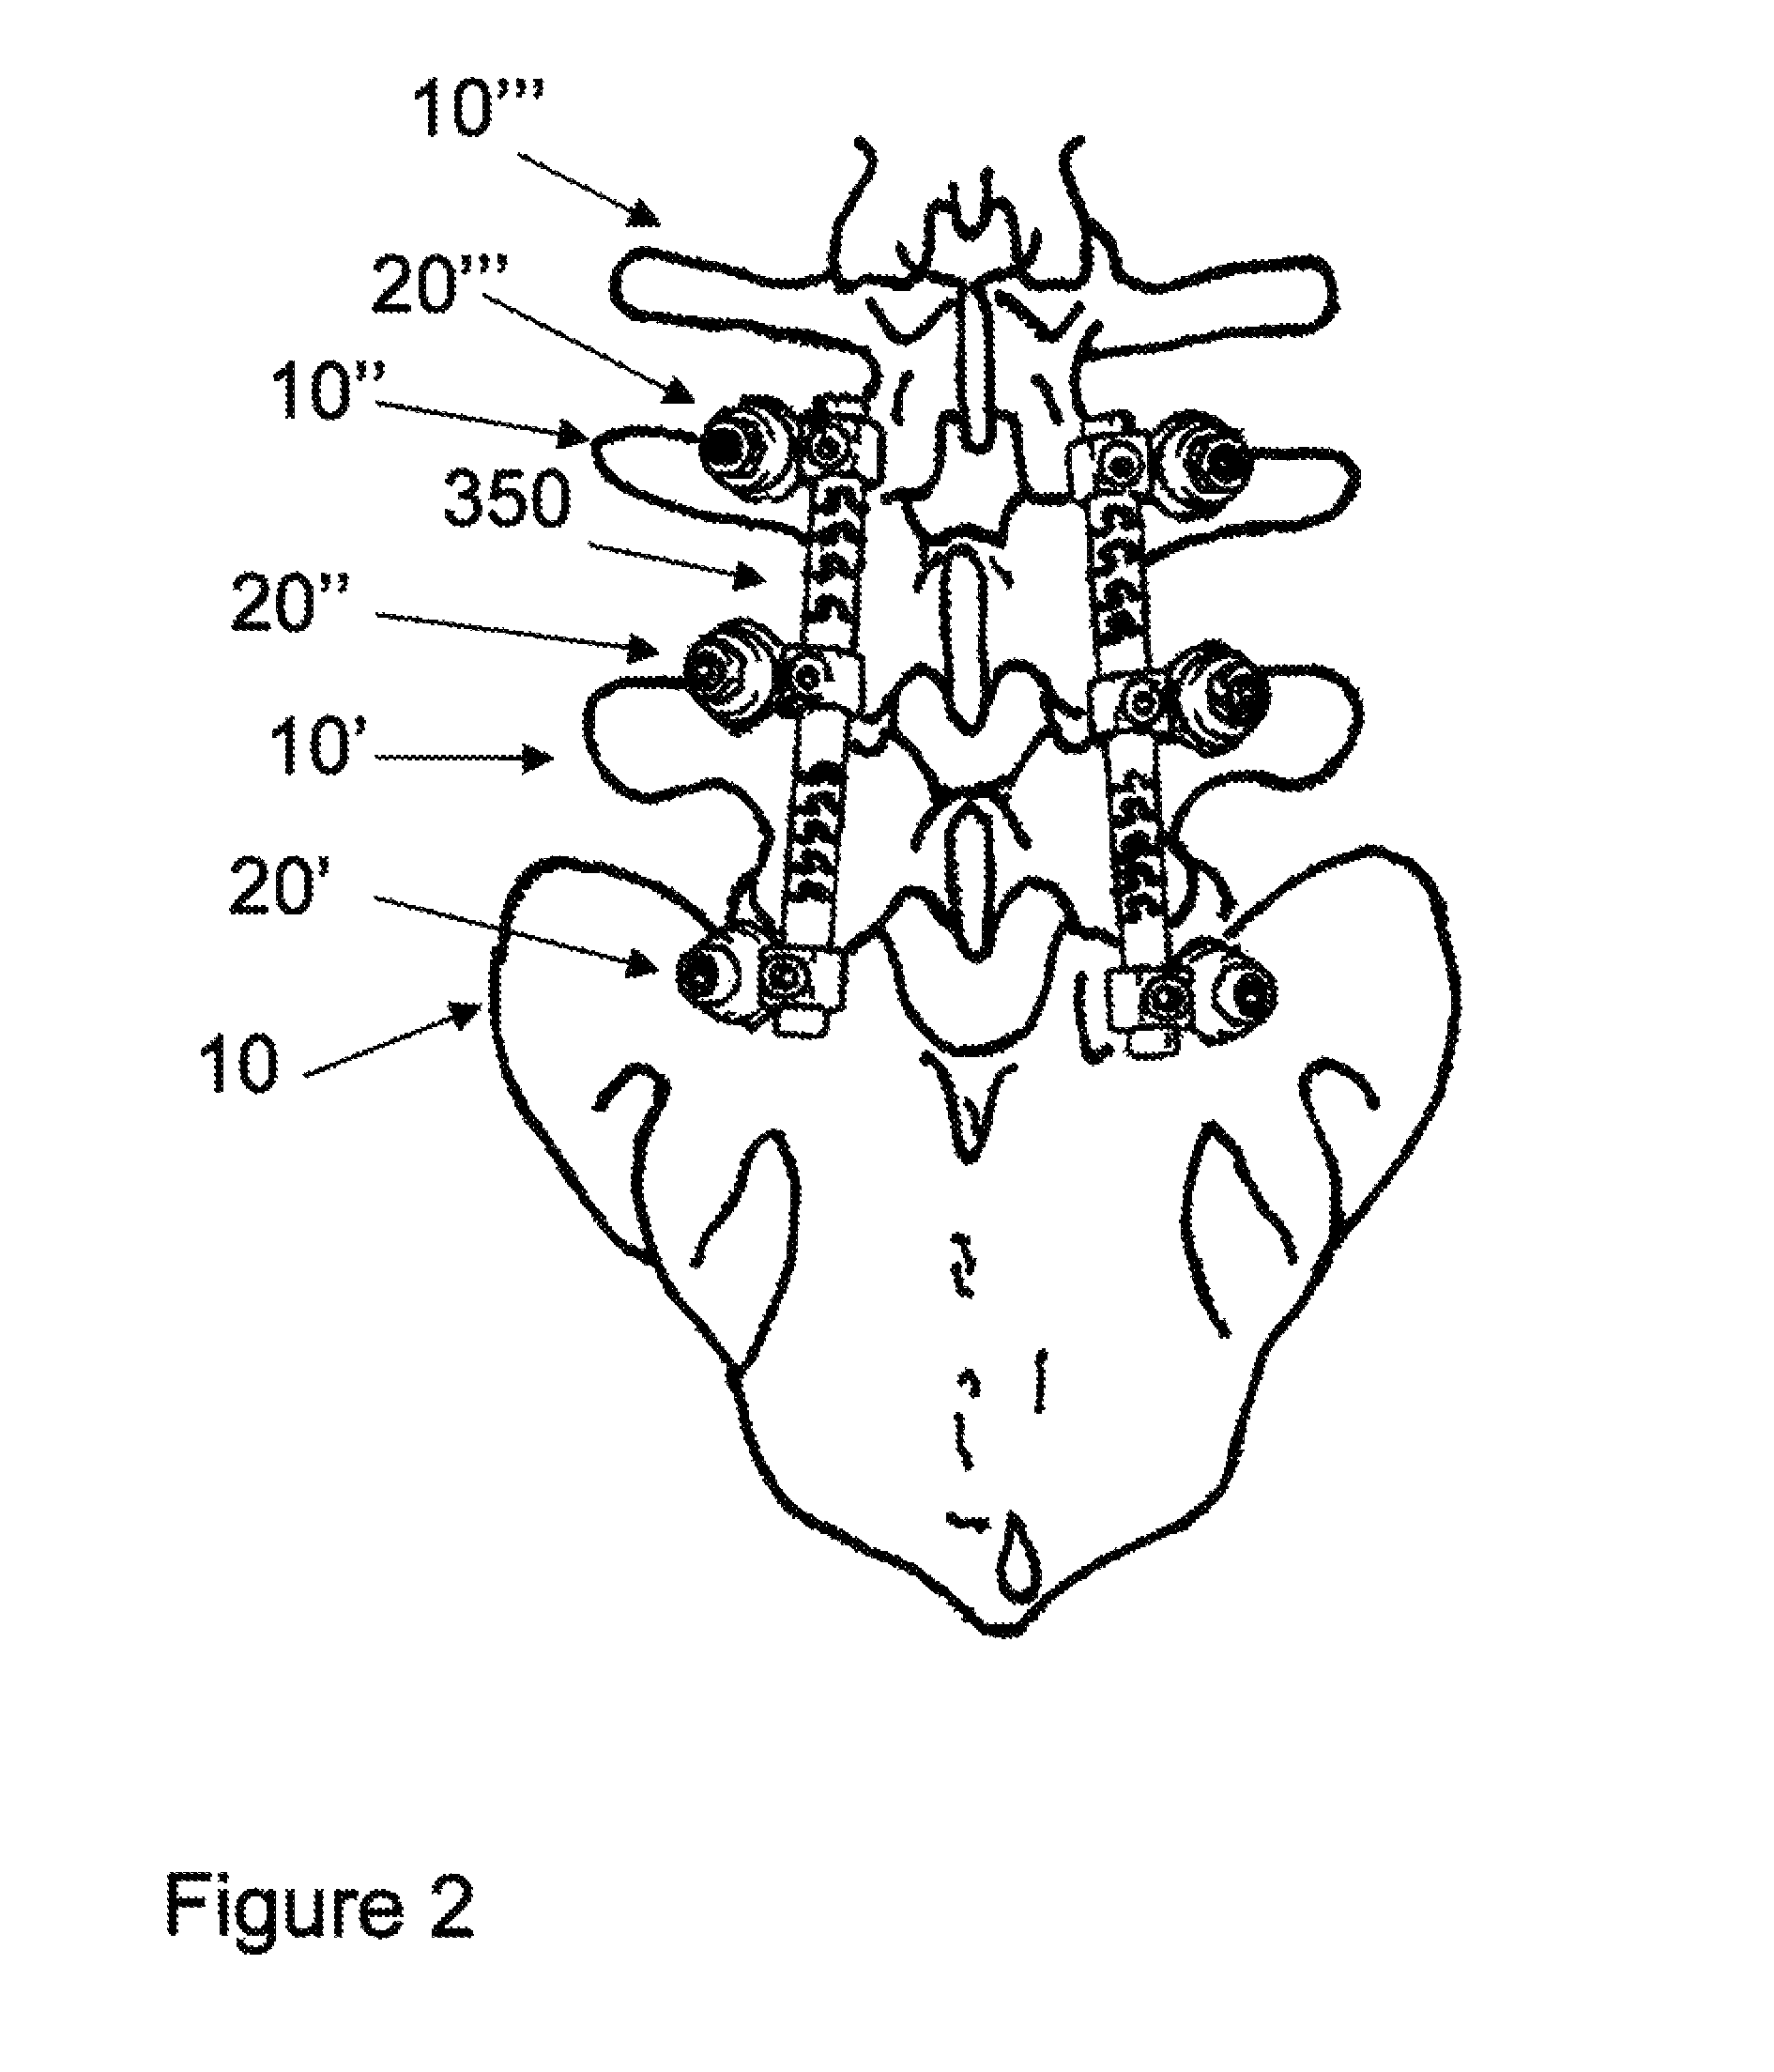 Flexible spine components having a concentric slot